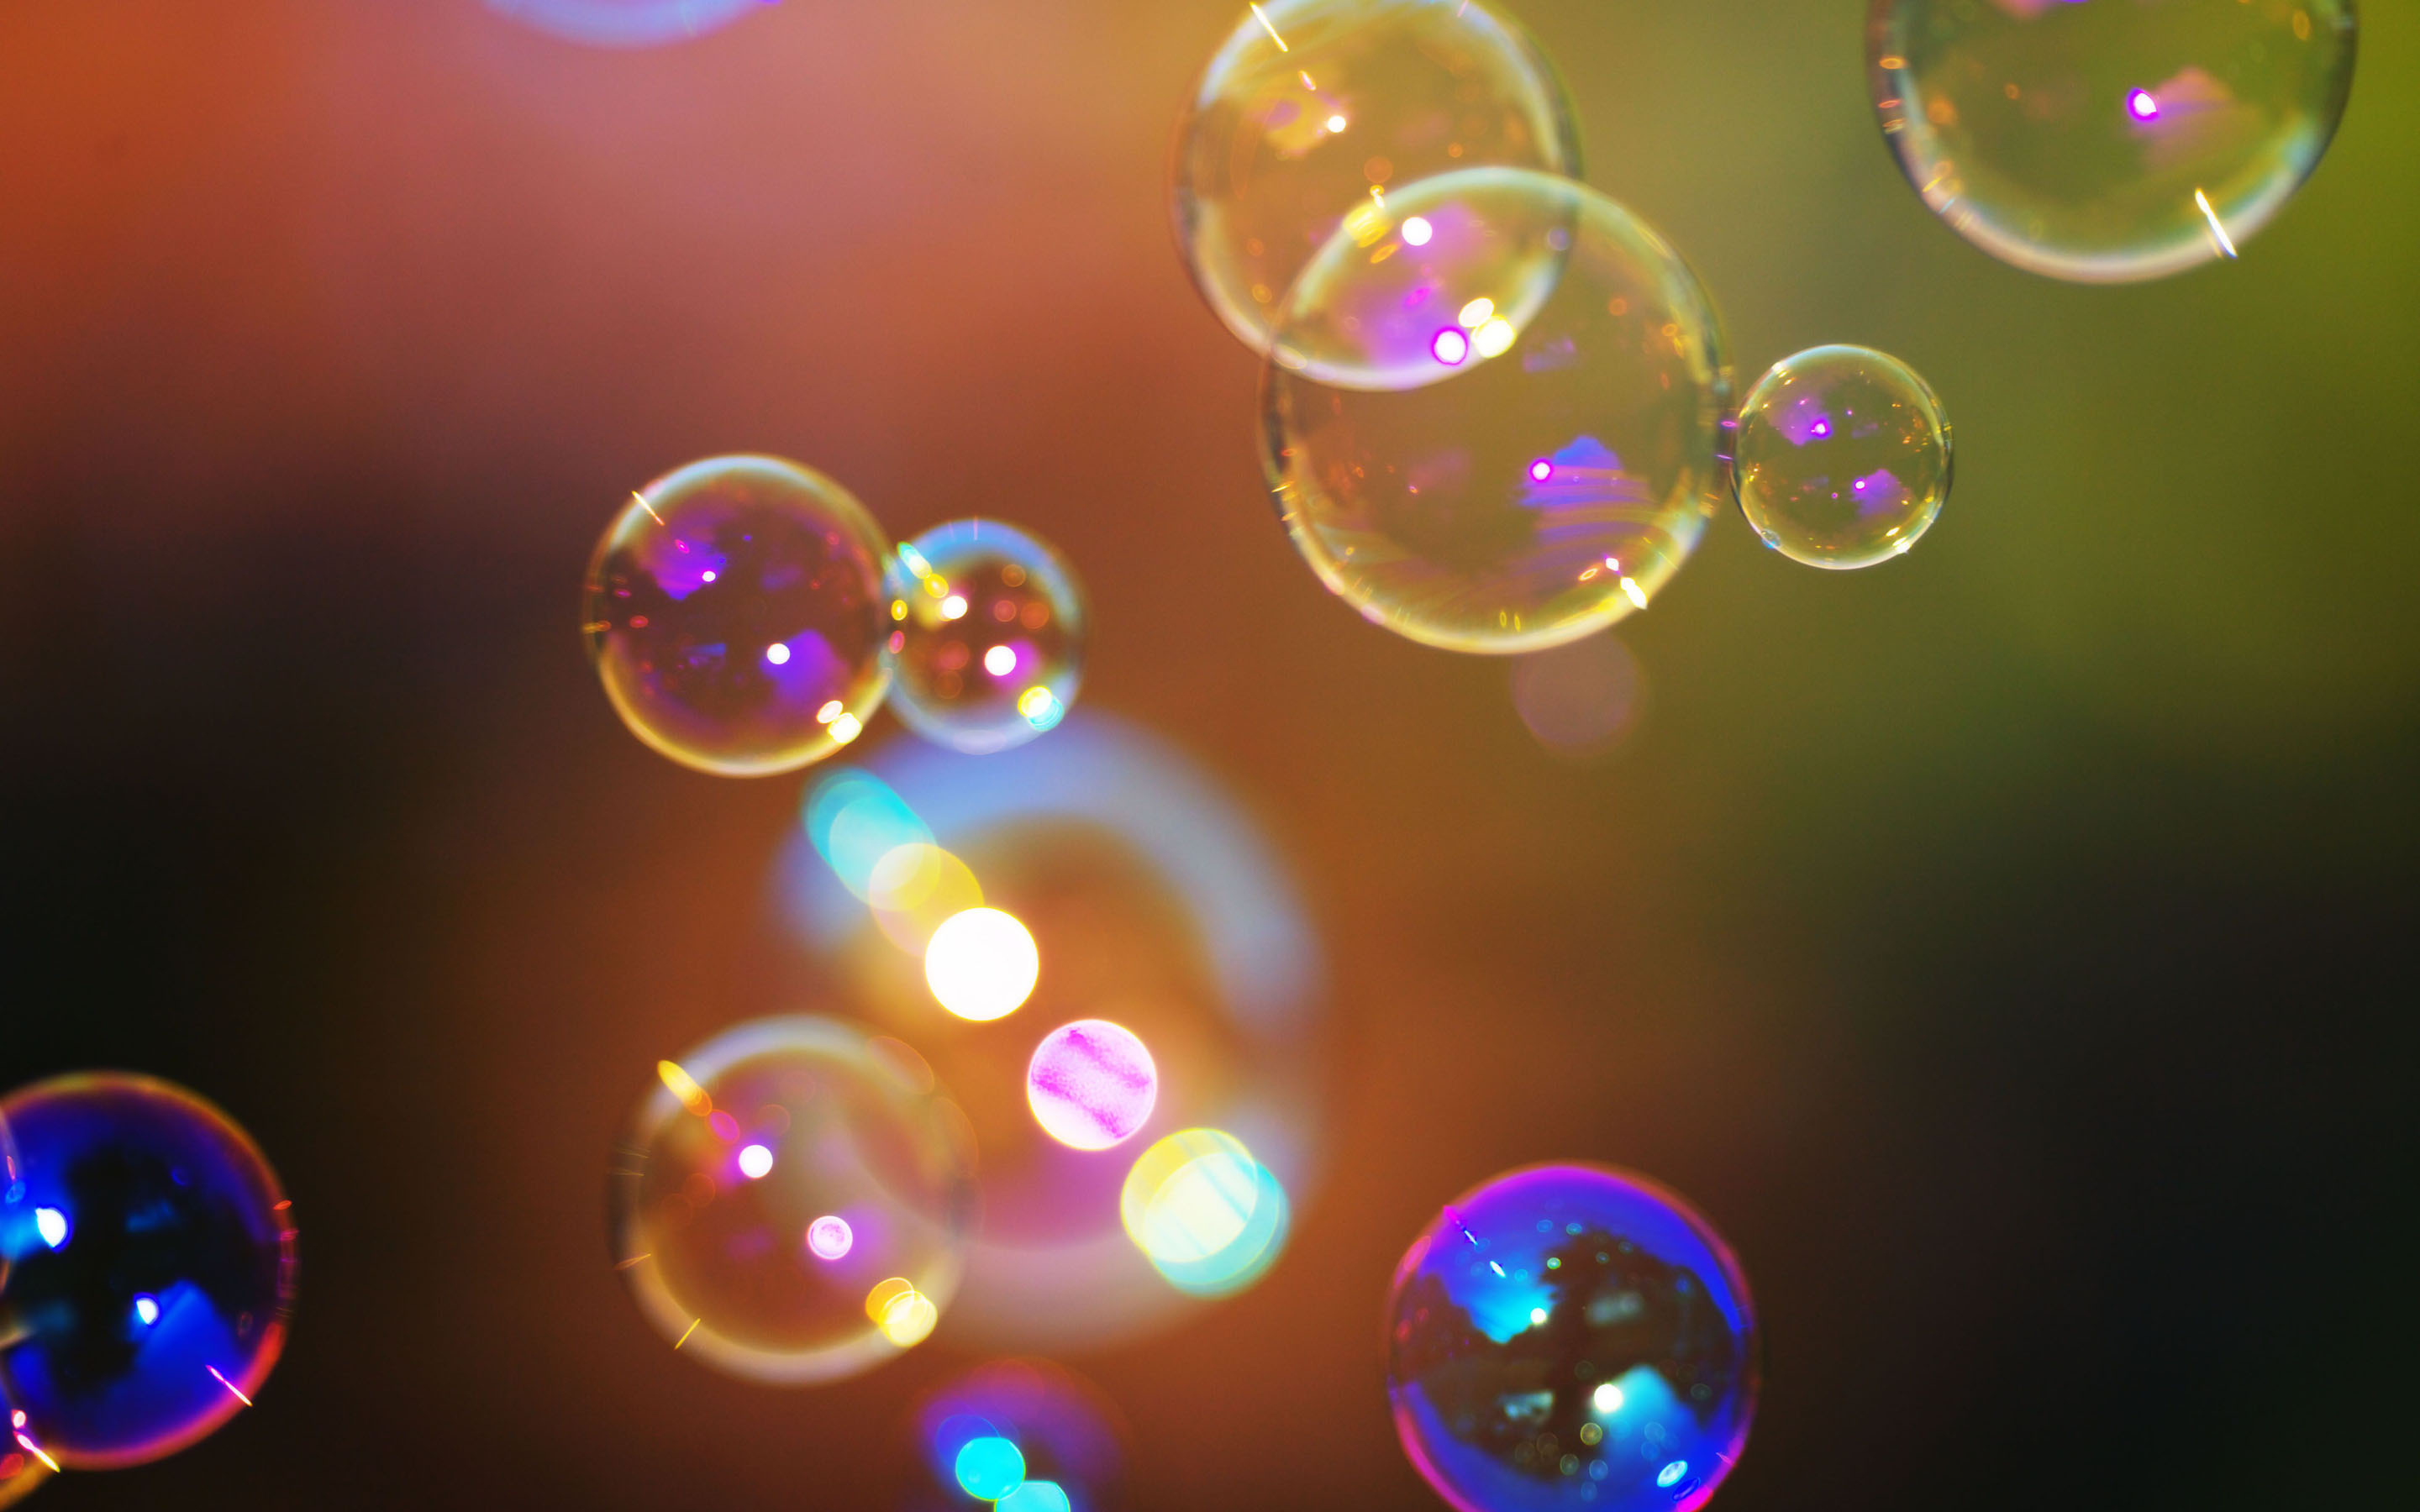 Effervescent Has Bubbles Or Froth Like A Sparkling Wine Bubble